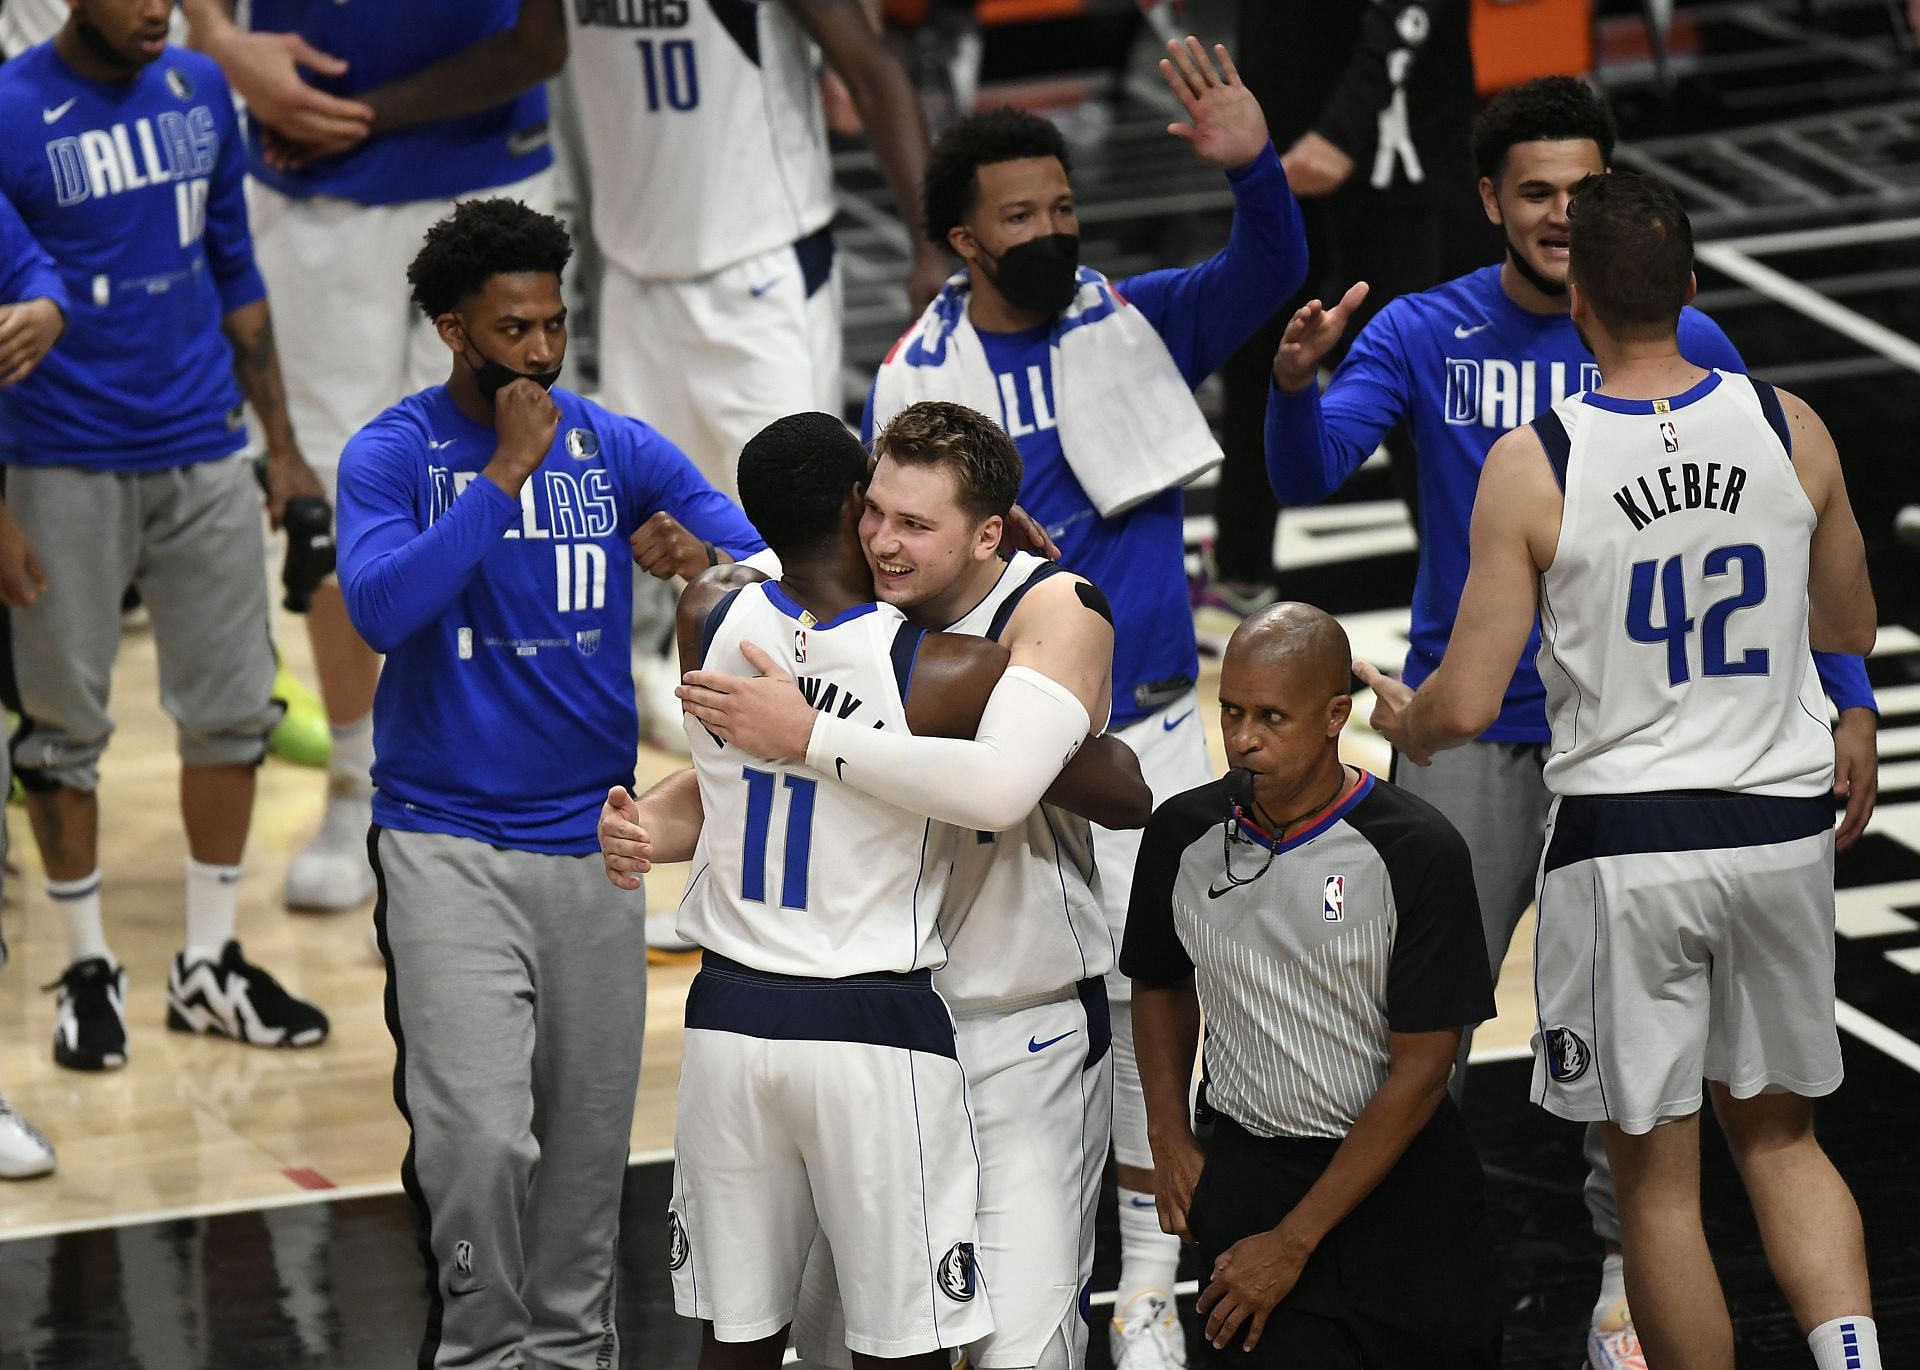 The Dallas Mavericks celebrate a win against the LA Clippers in the playoffs